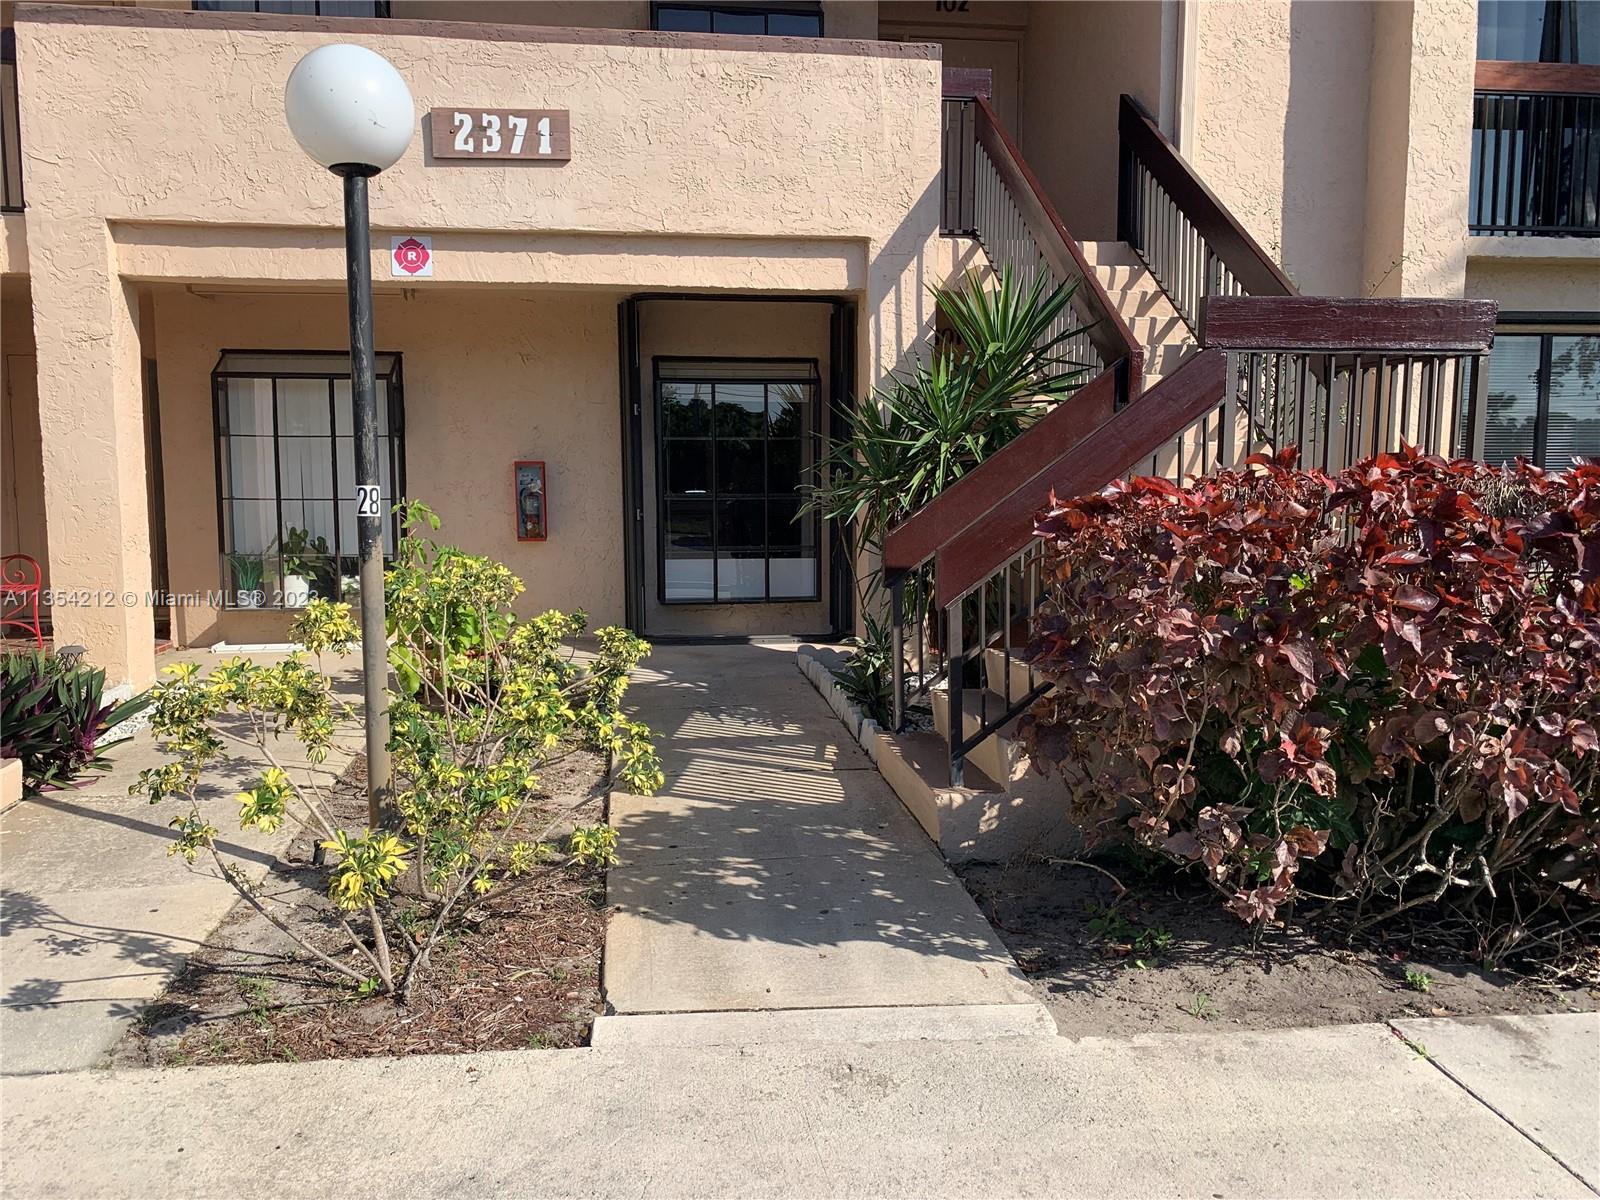 FIRST FLOOR WELL KEPT 2BED/2BATH CONDO, READY TO MOVE. EXCELLENT LOCATION SITUATED ONLY 8 MINUTES TO